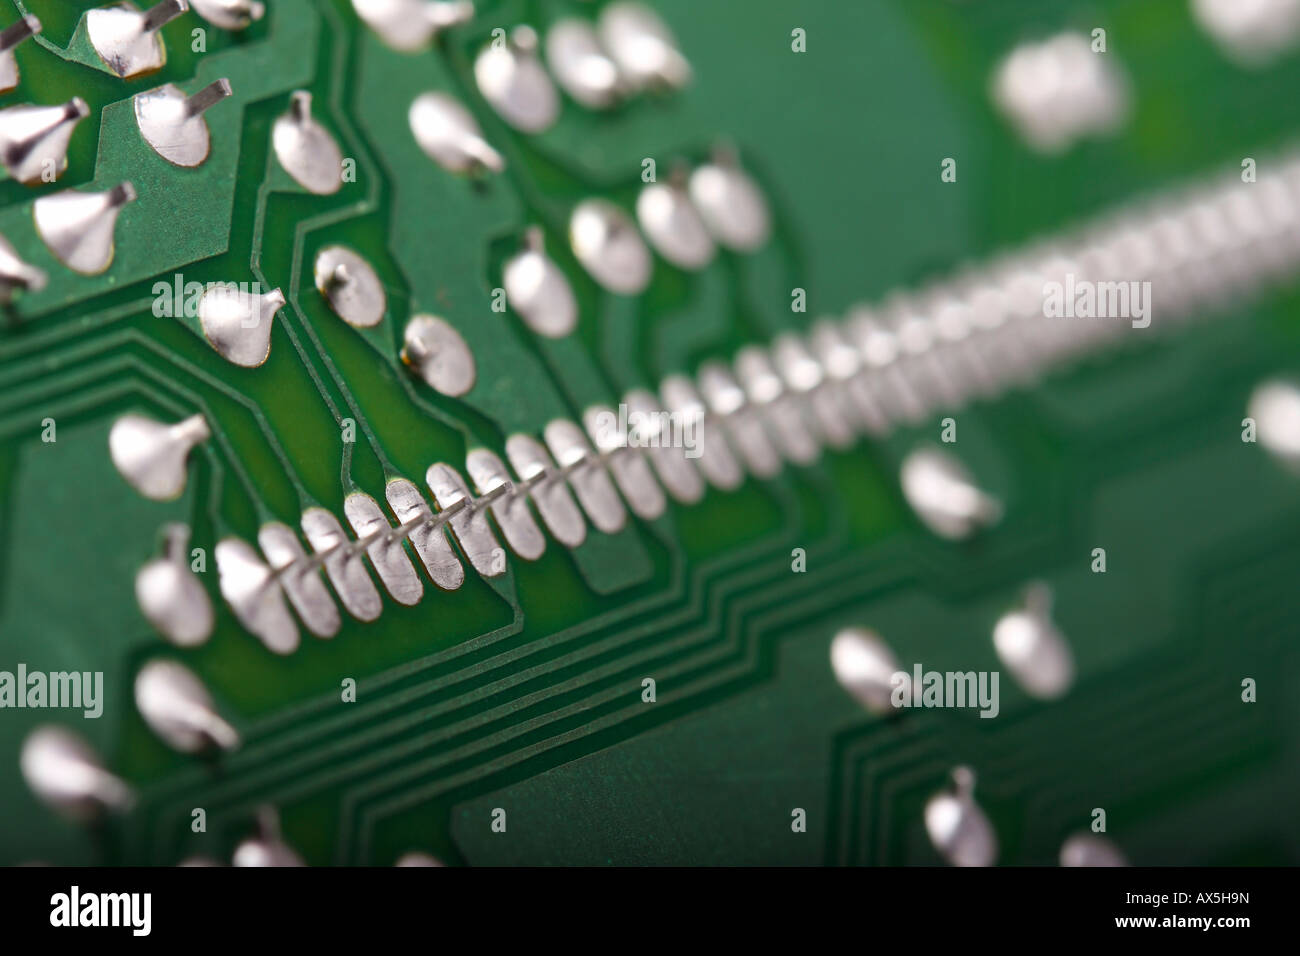 Green printed wiring board with soldering points Stock Photo